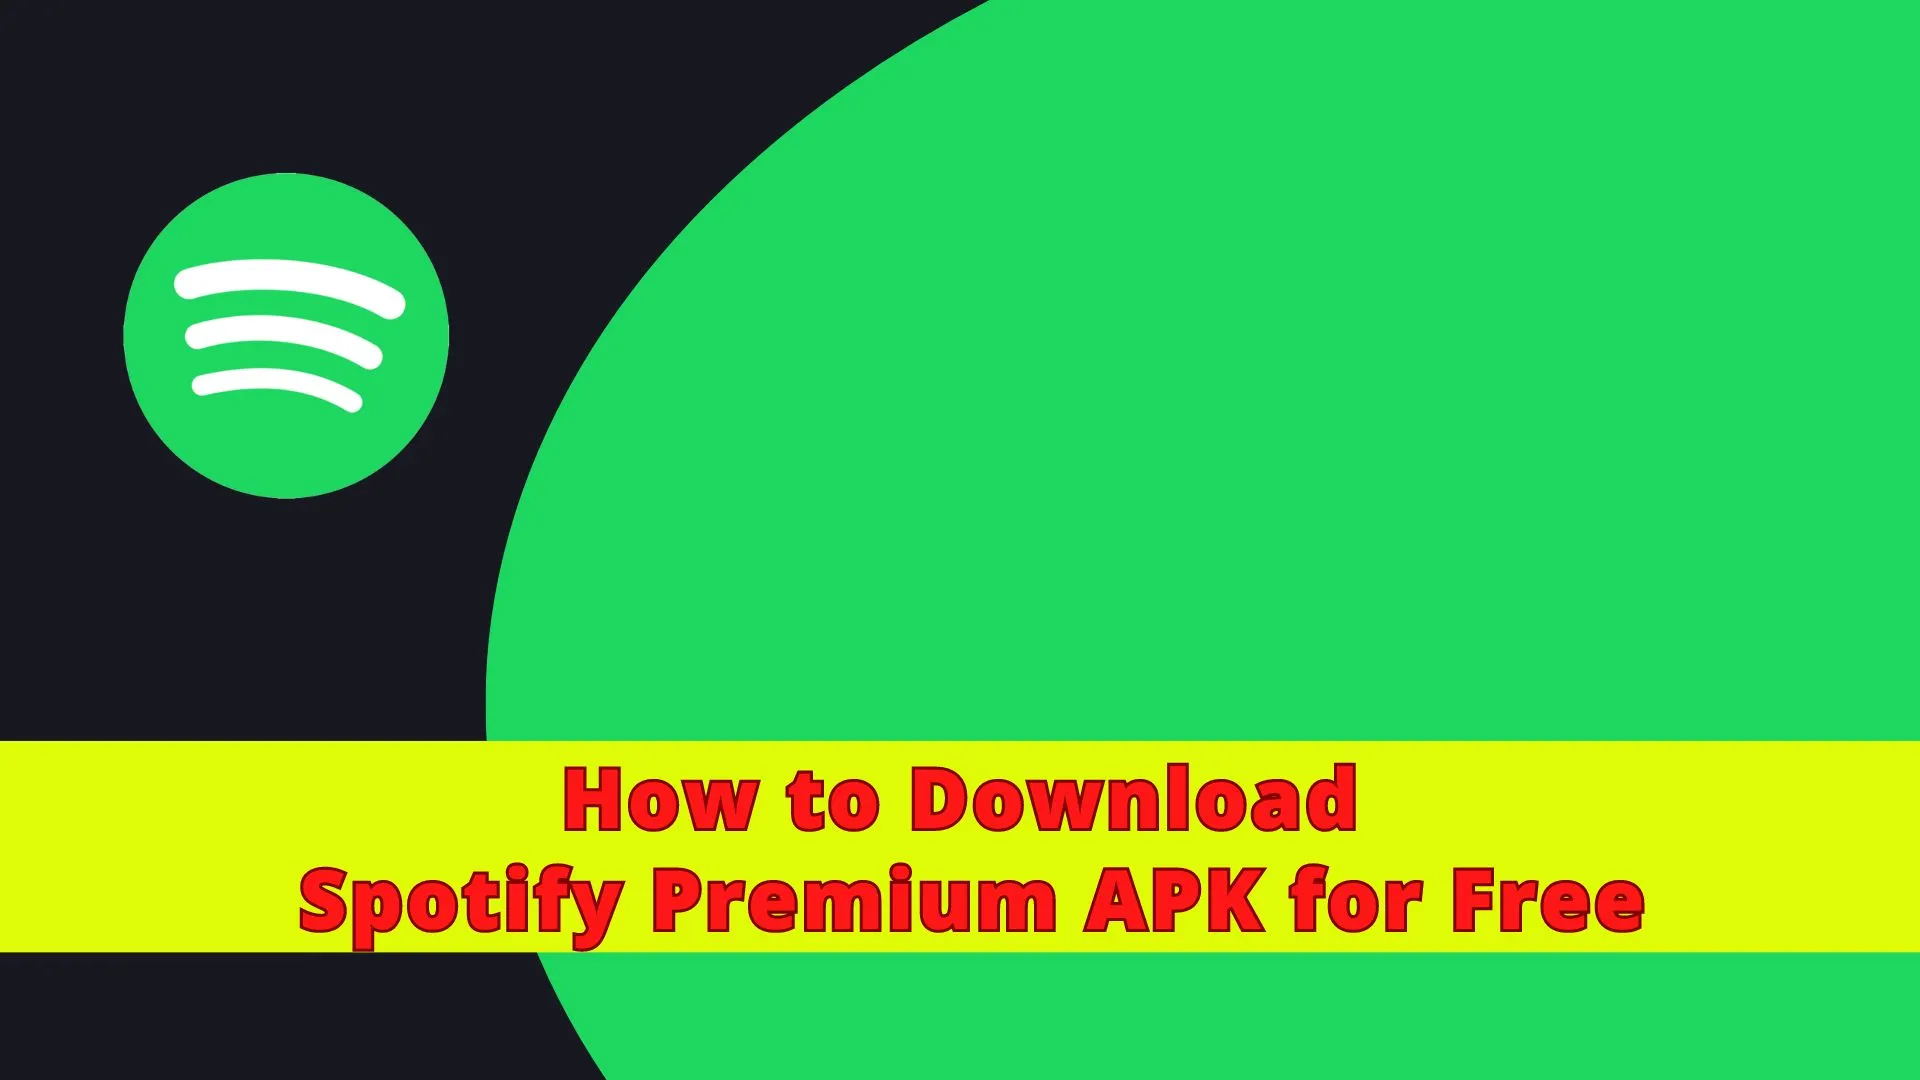 How to Download Spotify Premium APK